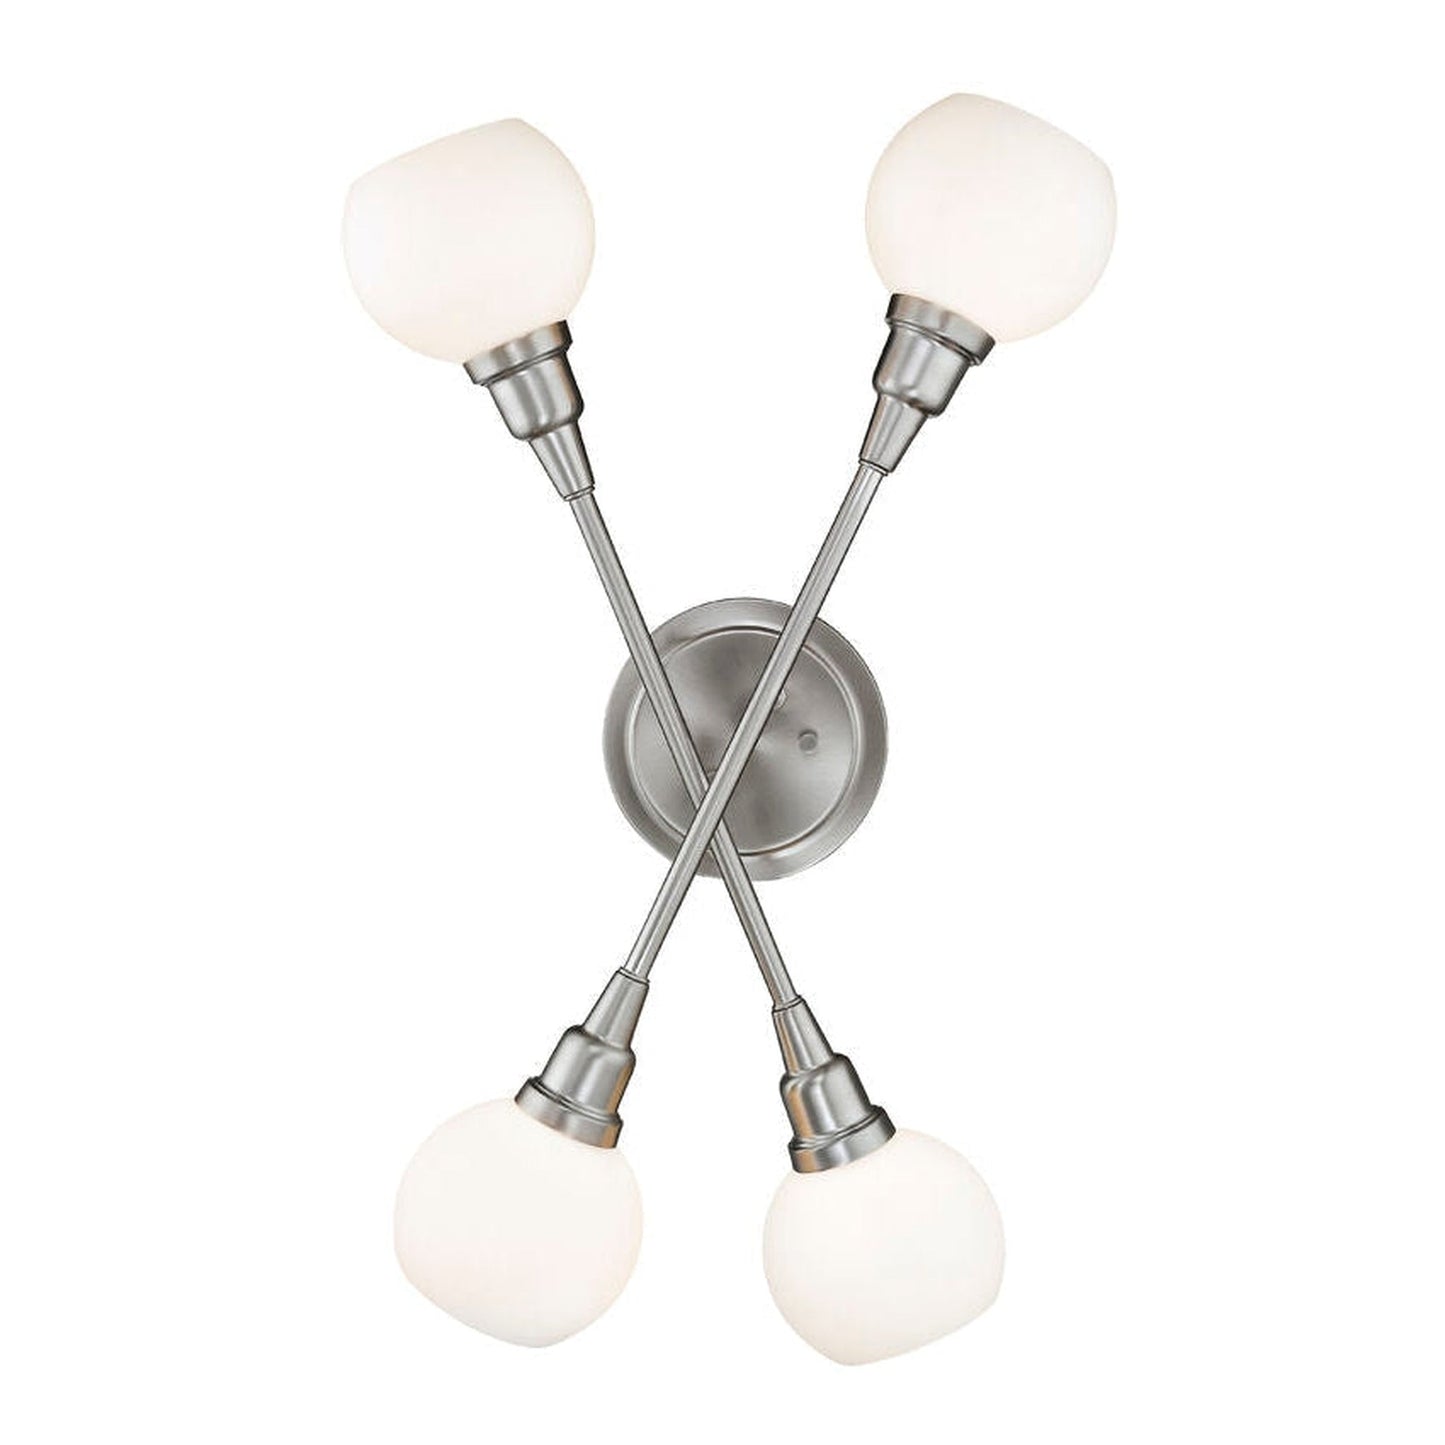 Z-Lite Tian 12" 4-Light Brushed Nickel Wall Sconce With Matte Opal Glass Shade